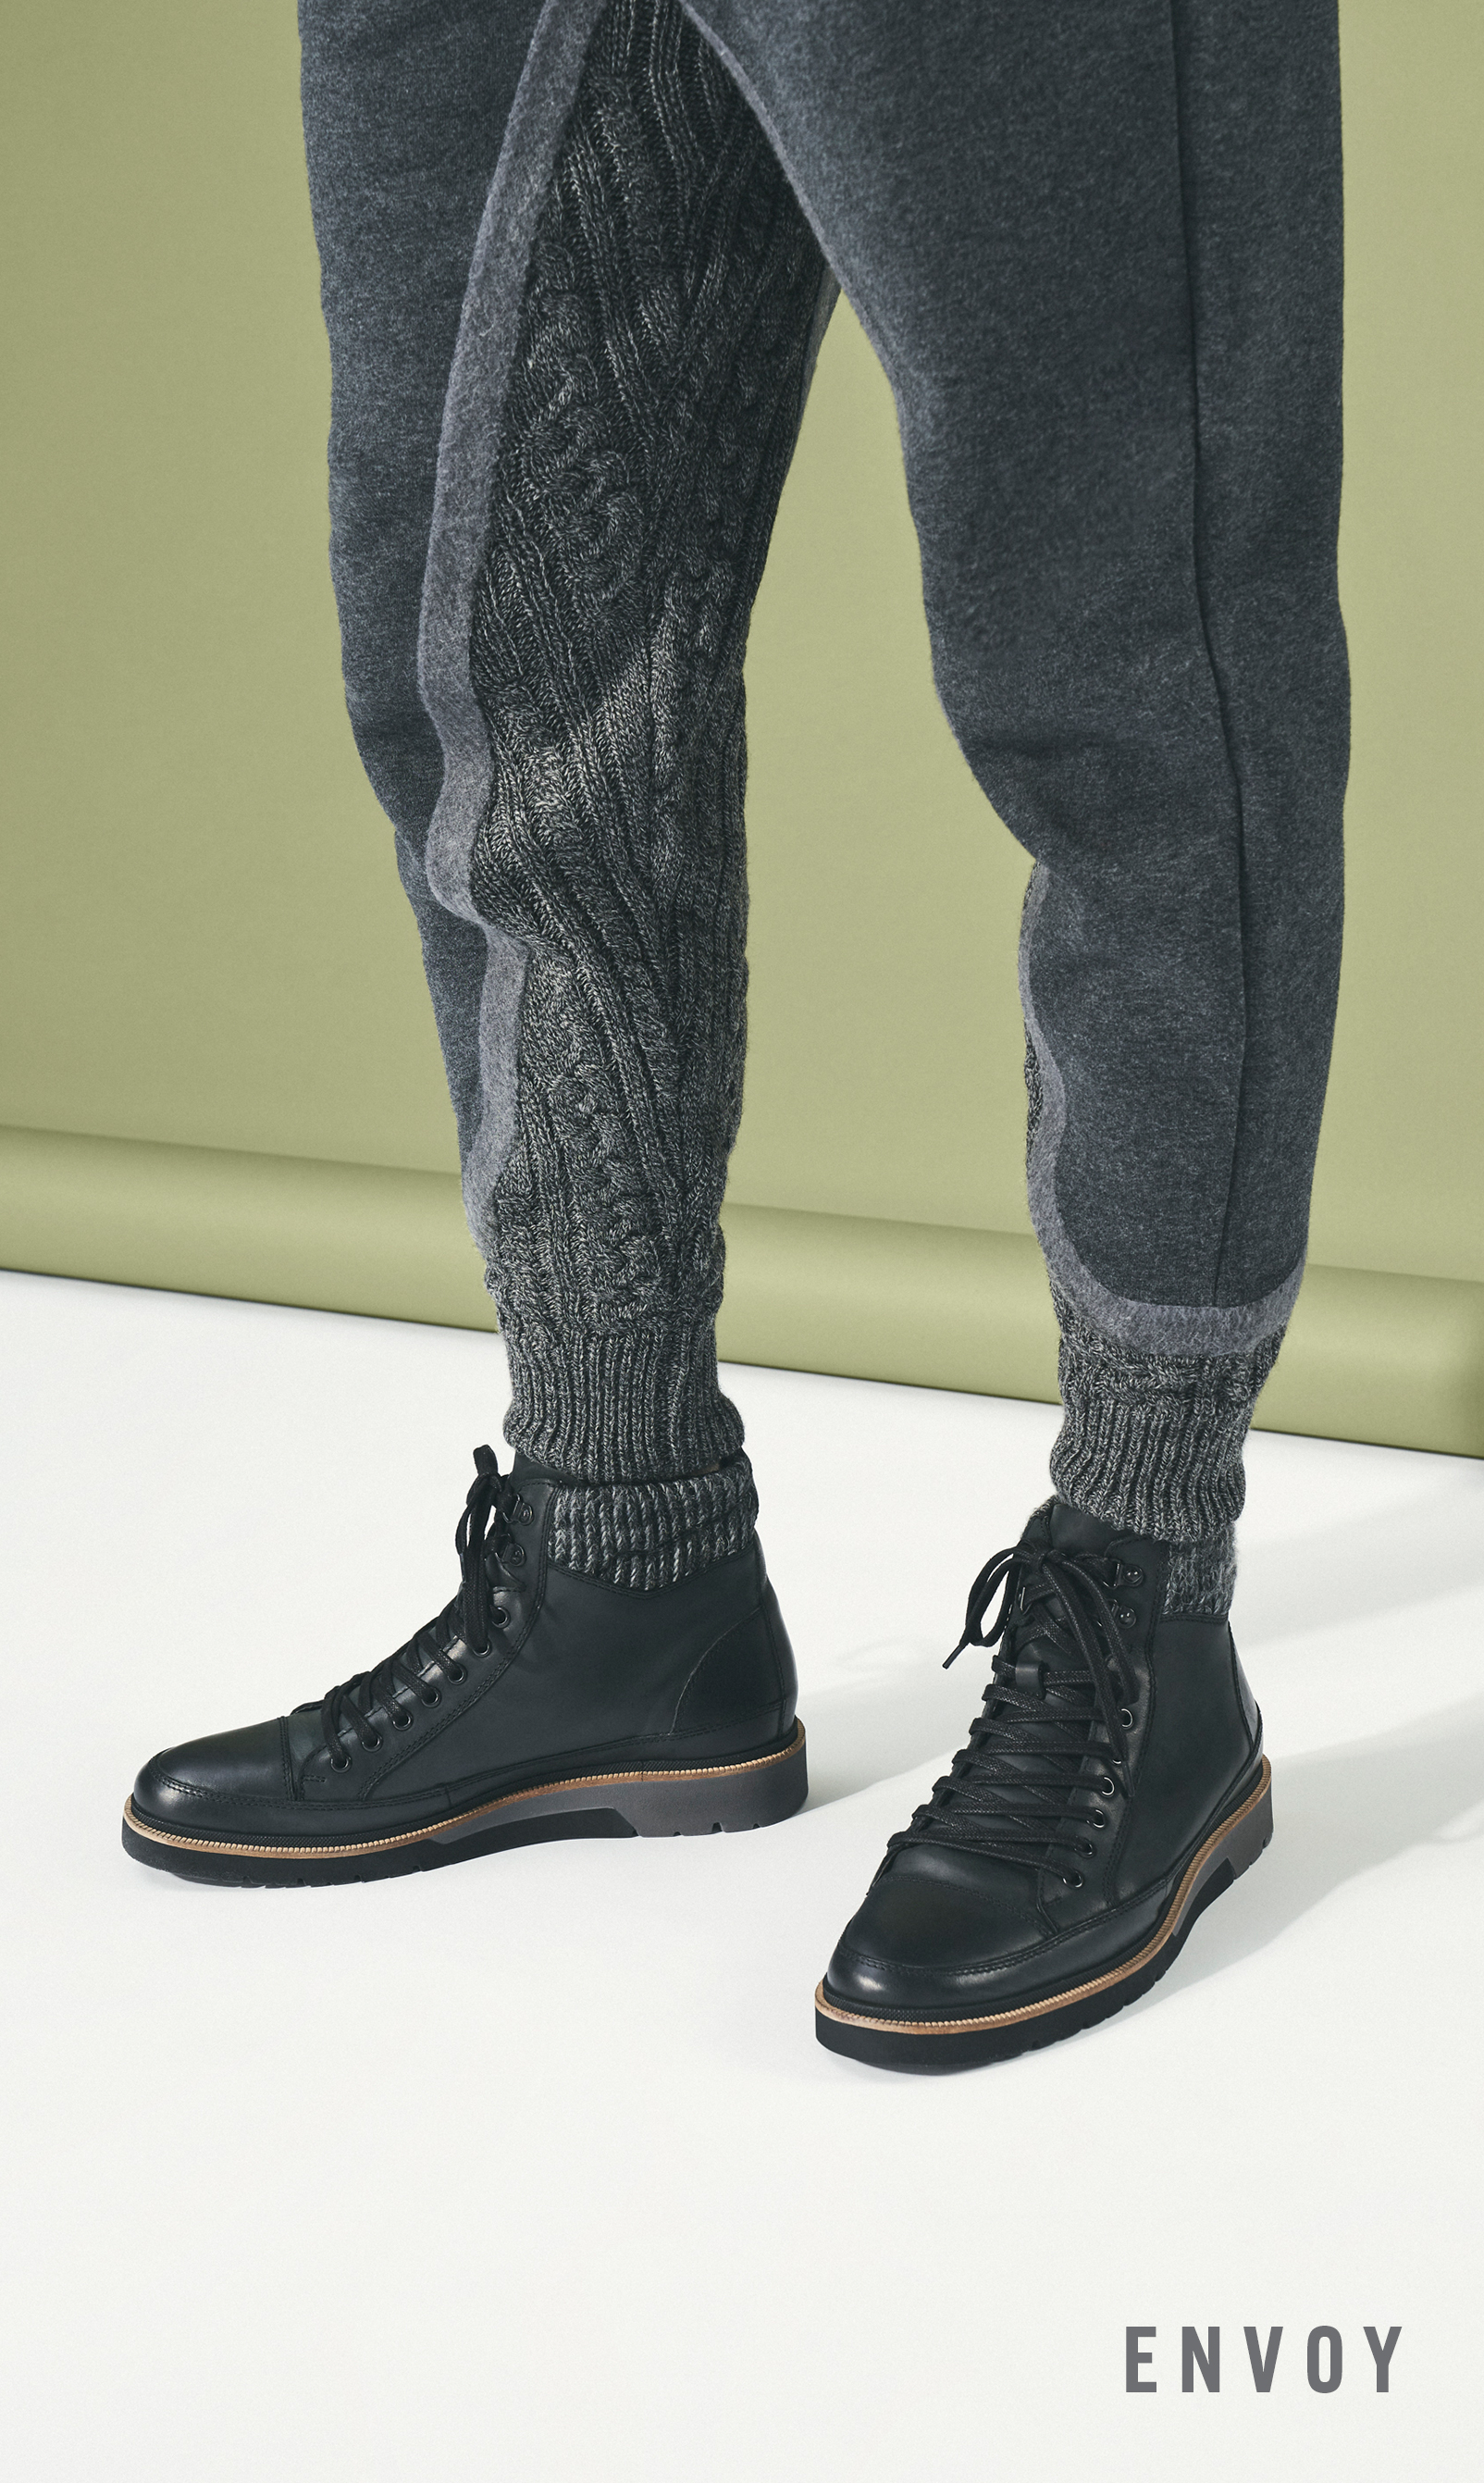 Men's Boots category. Image features the Envoy boot in black.